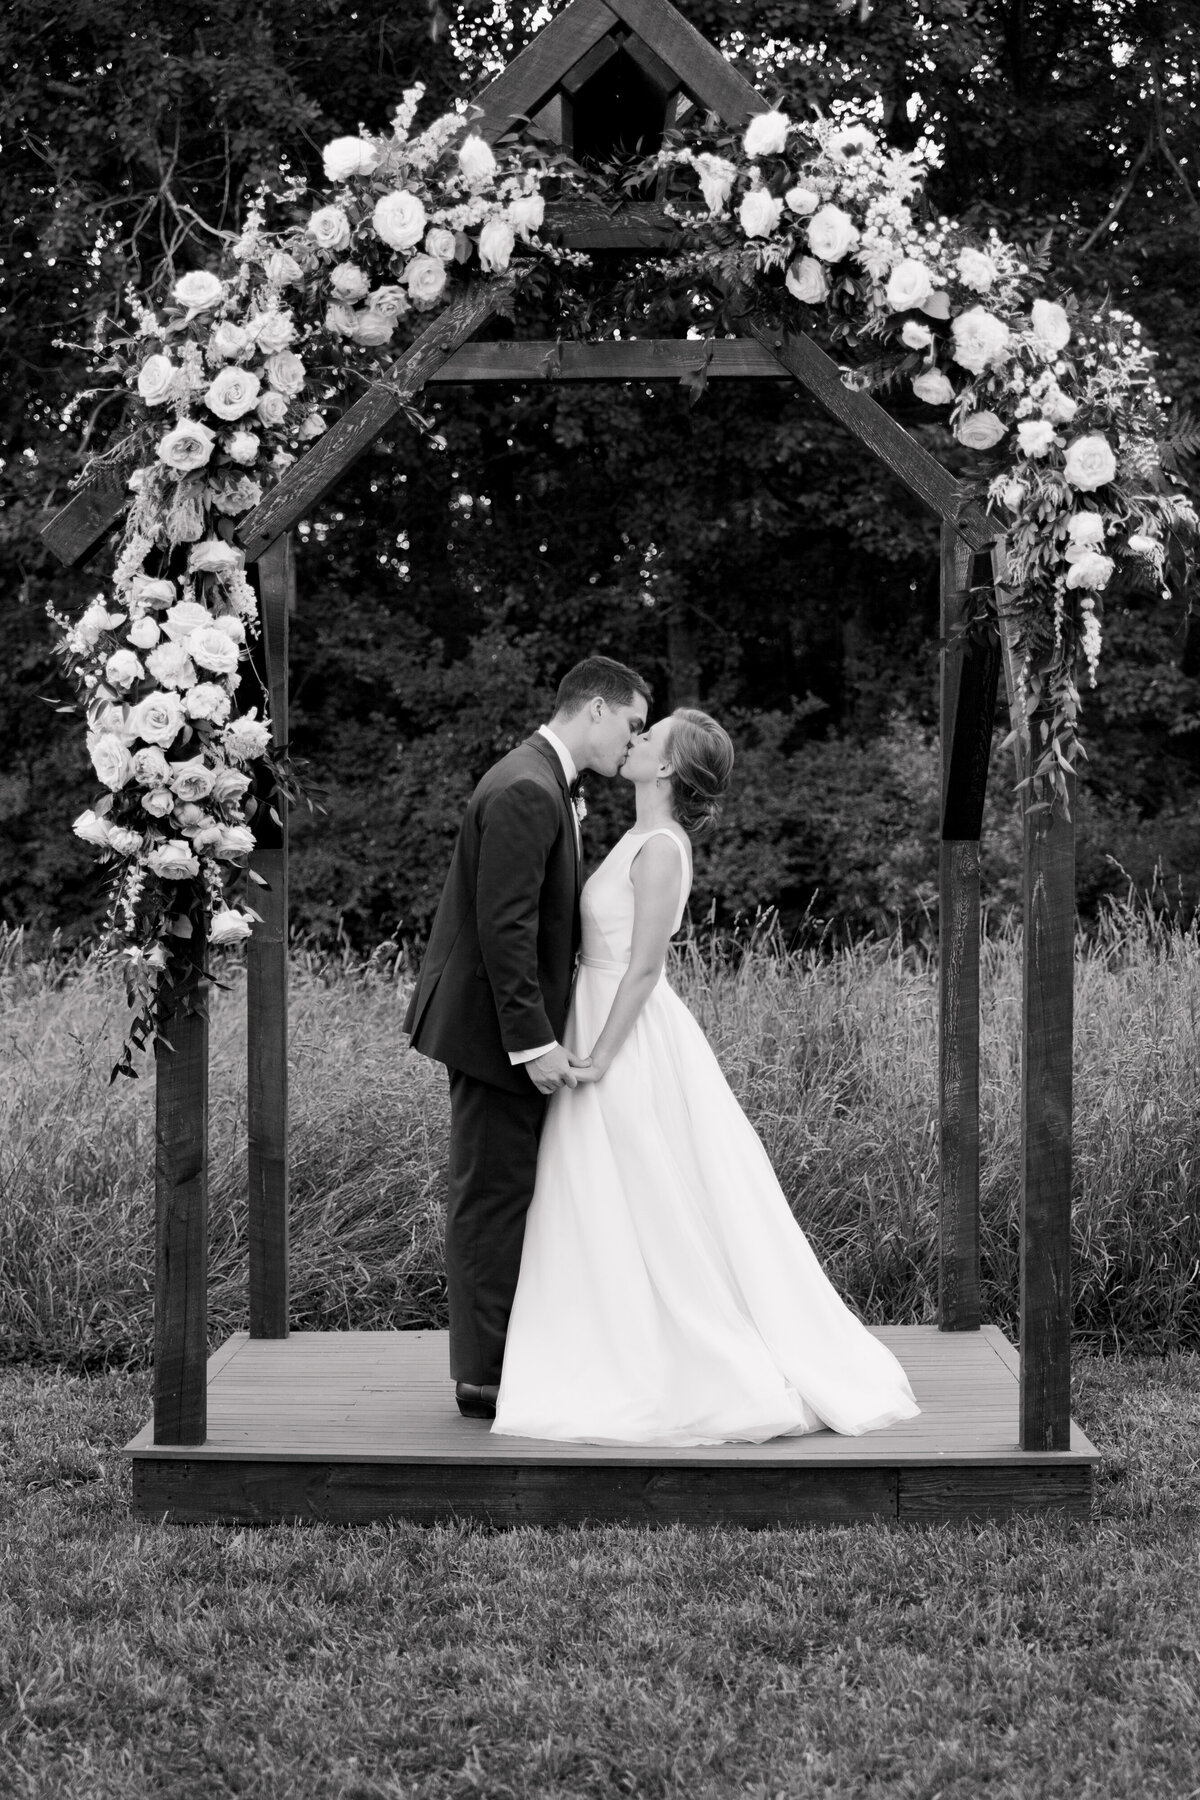 Bride and groom kissing underneath a wooden arch decorated with flowers